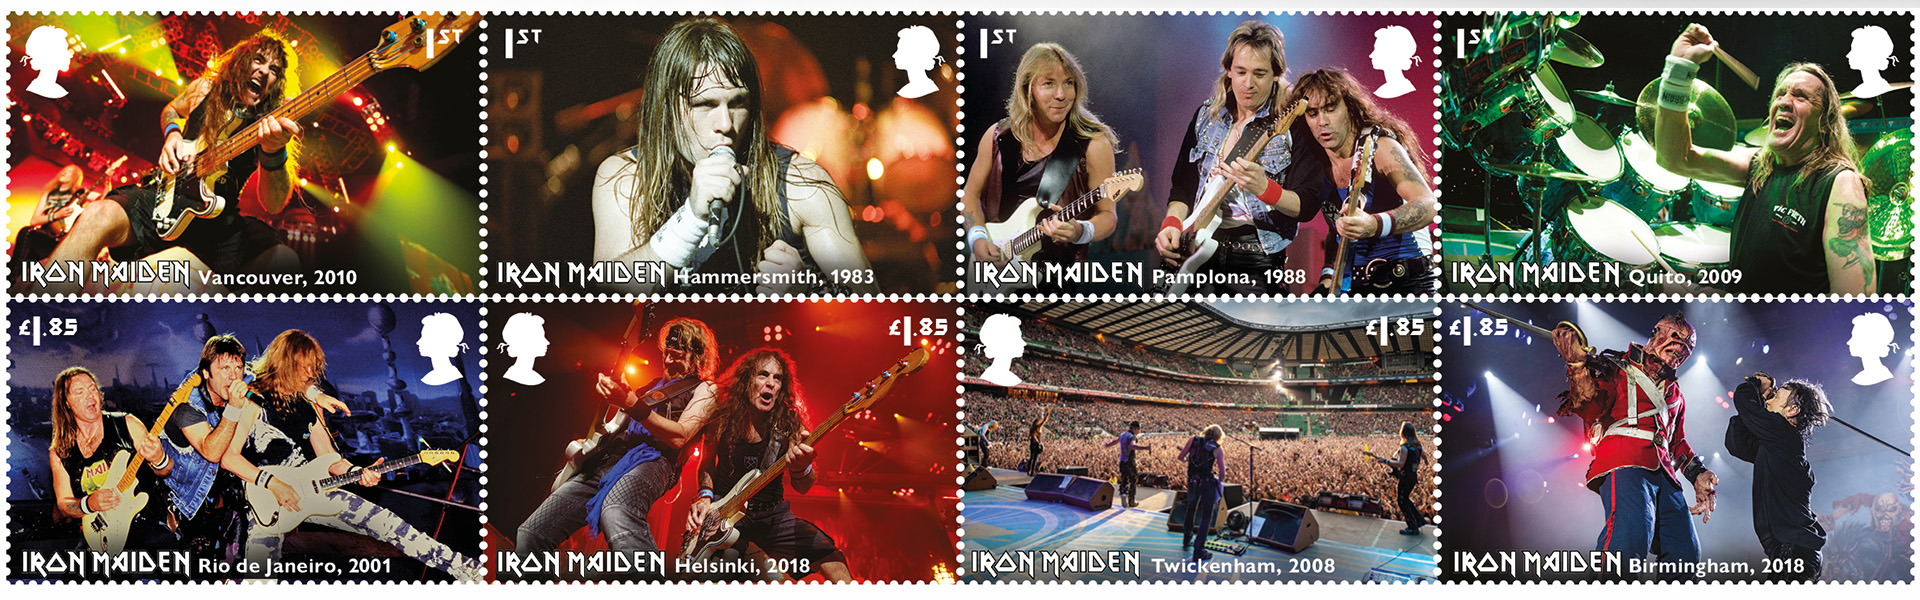 ROYAL MAIL HONOUR IRON MAIDEN WITH A SET OF 12 SPECIAL STAMPS